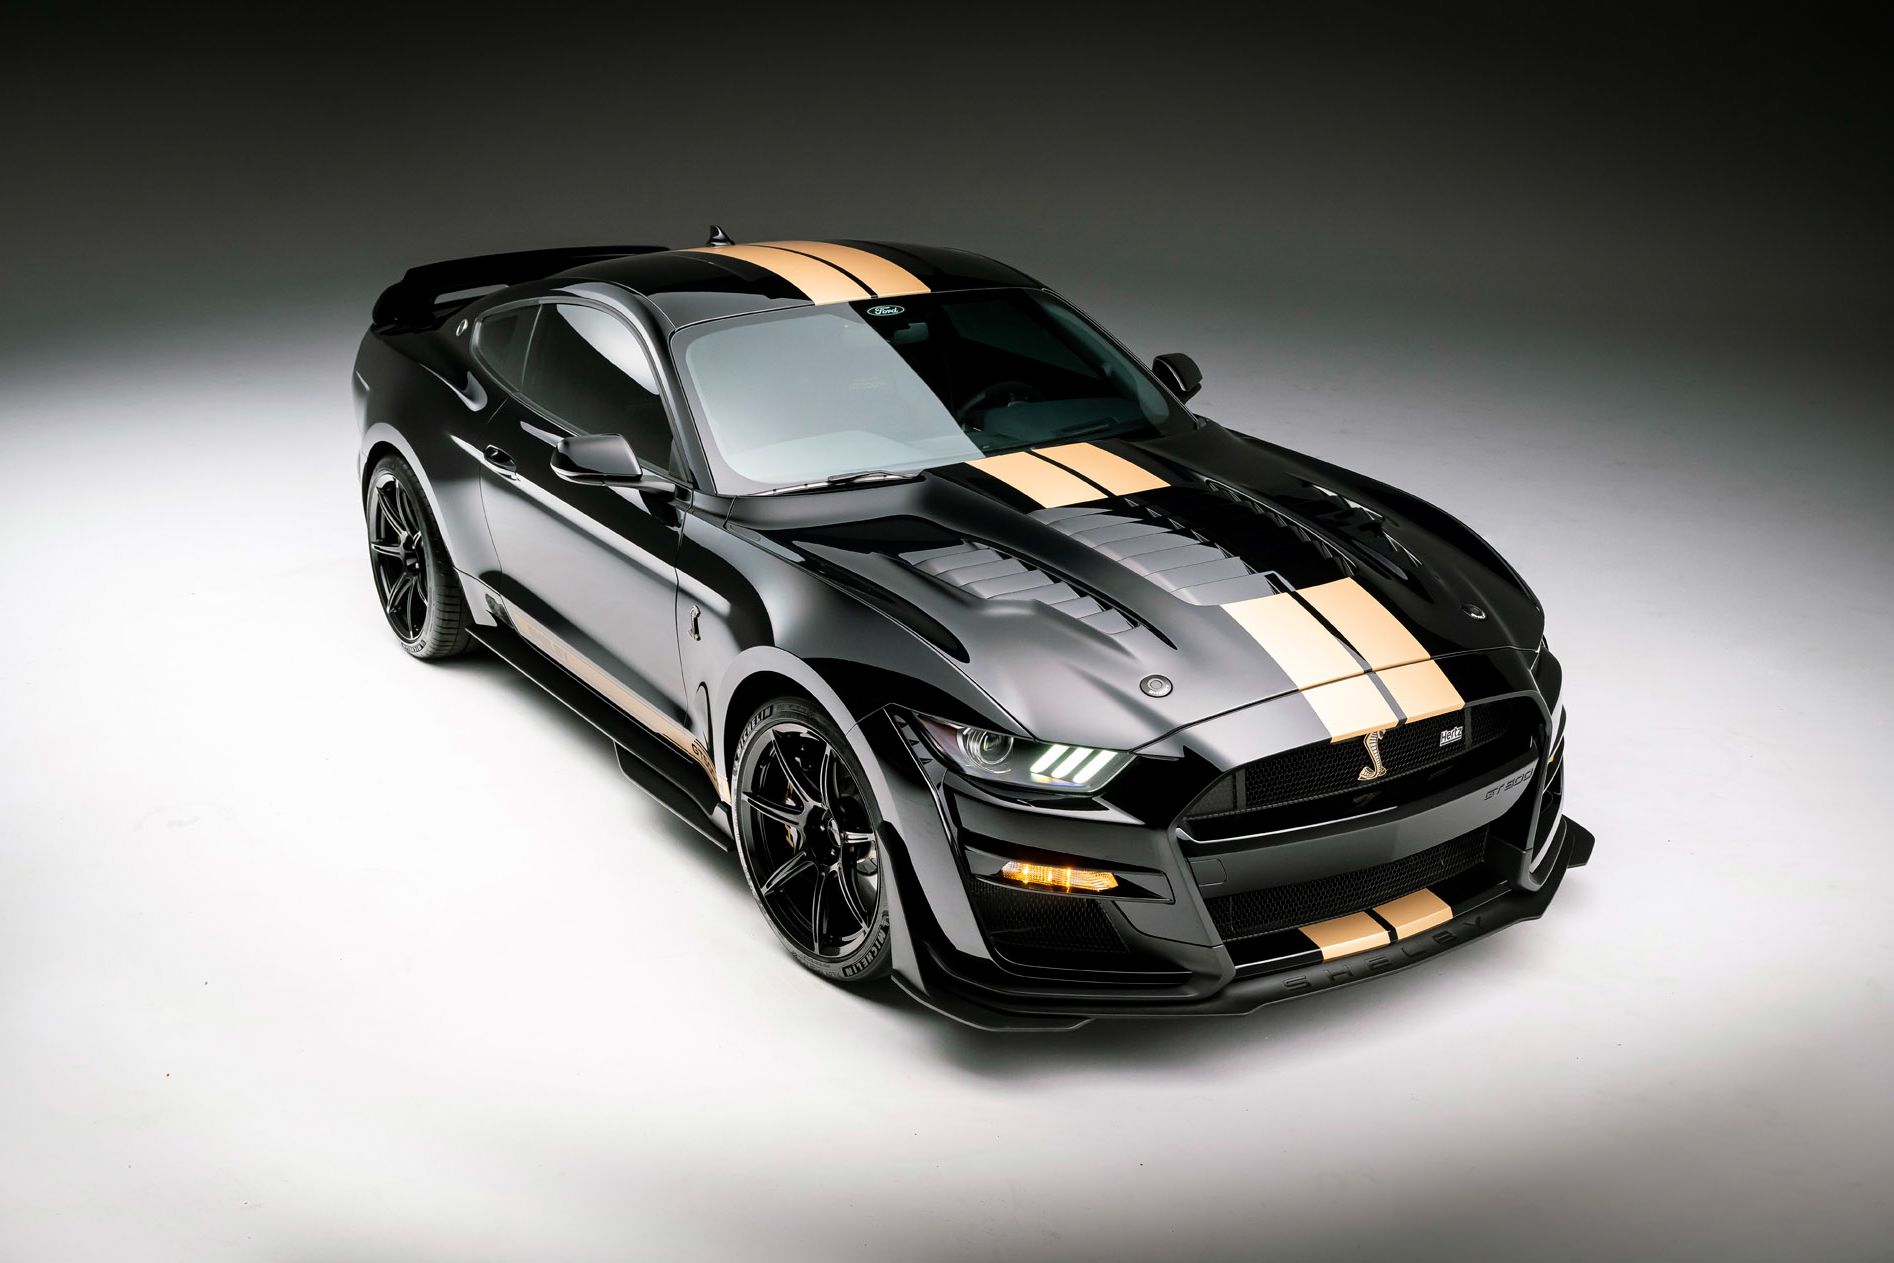 View Photos of the 2022 Ford Mustang Shelby GT500-H